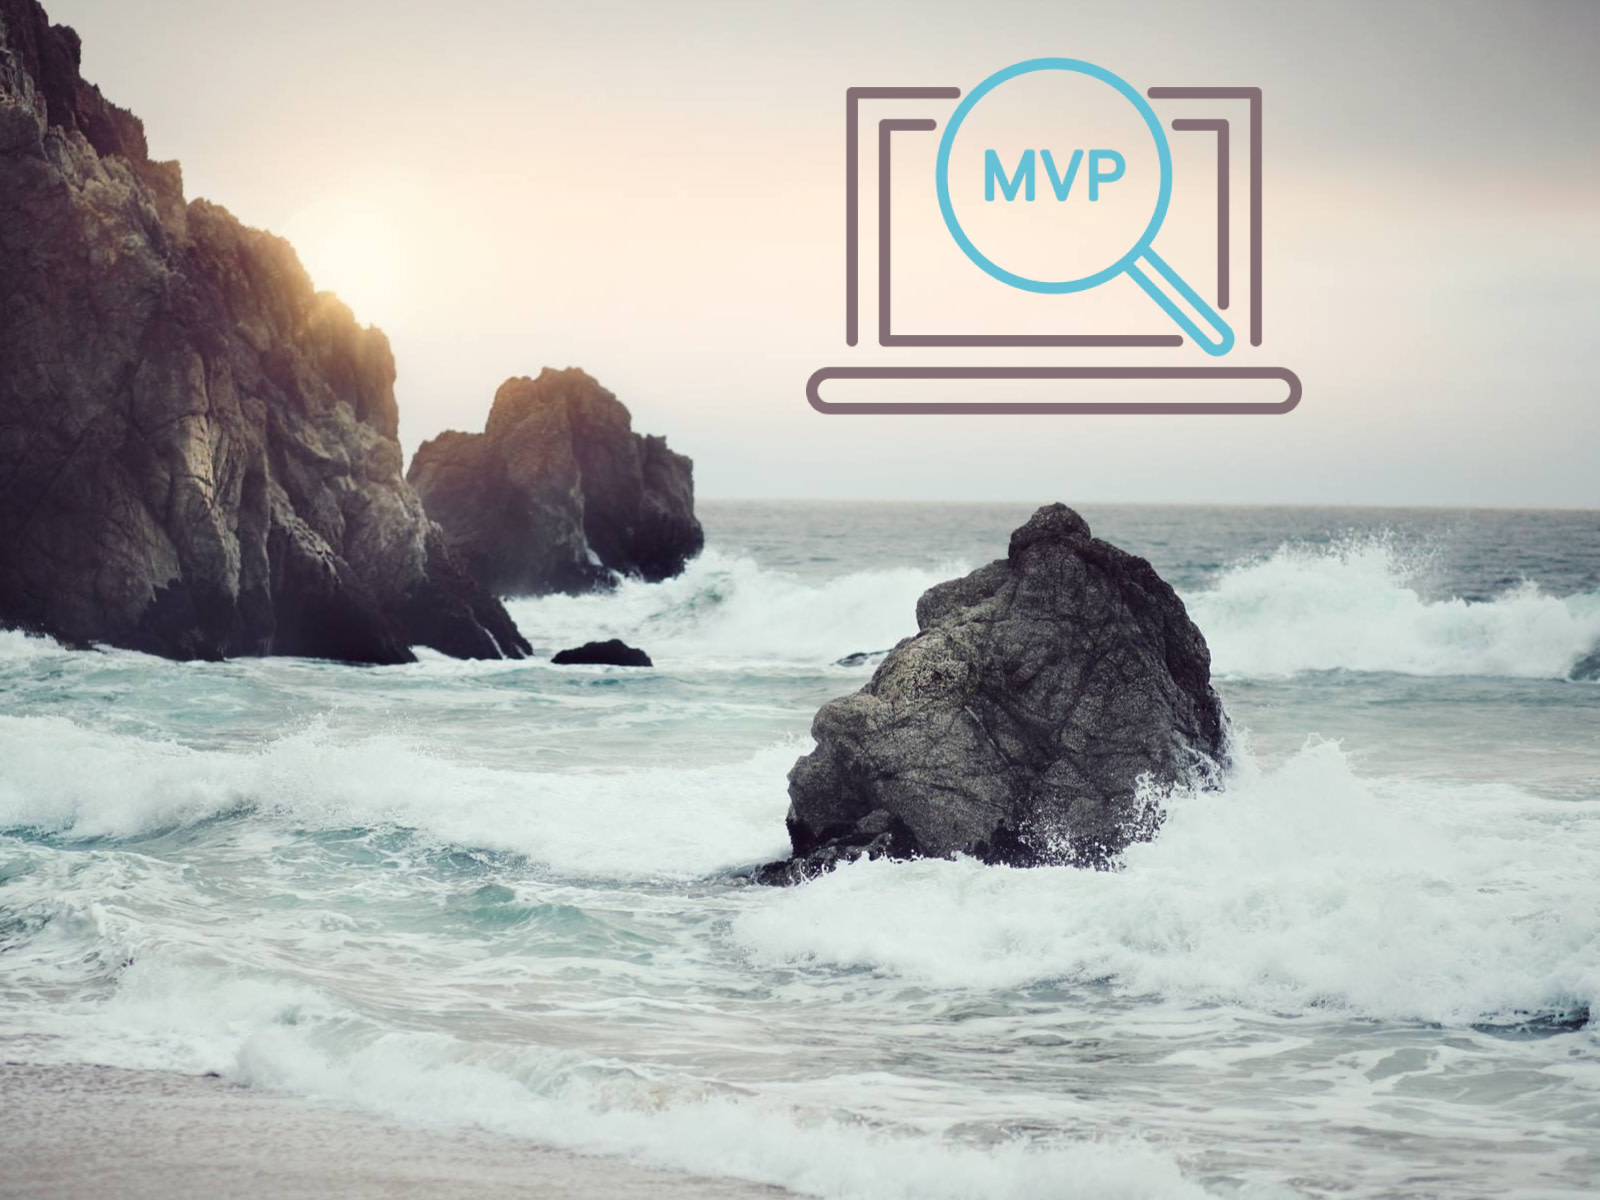 MVP icon in the front, Seashore with small waves crashing at the rocks at sunrise in the background. 